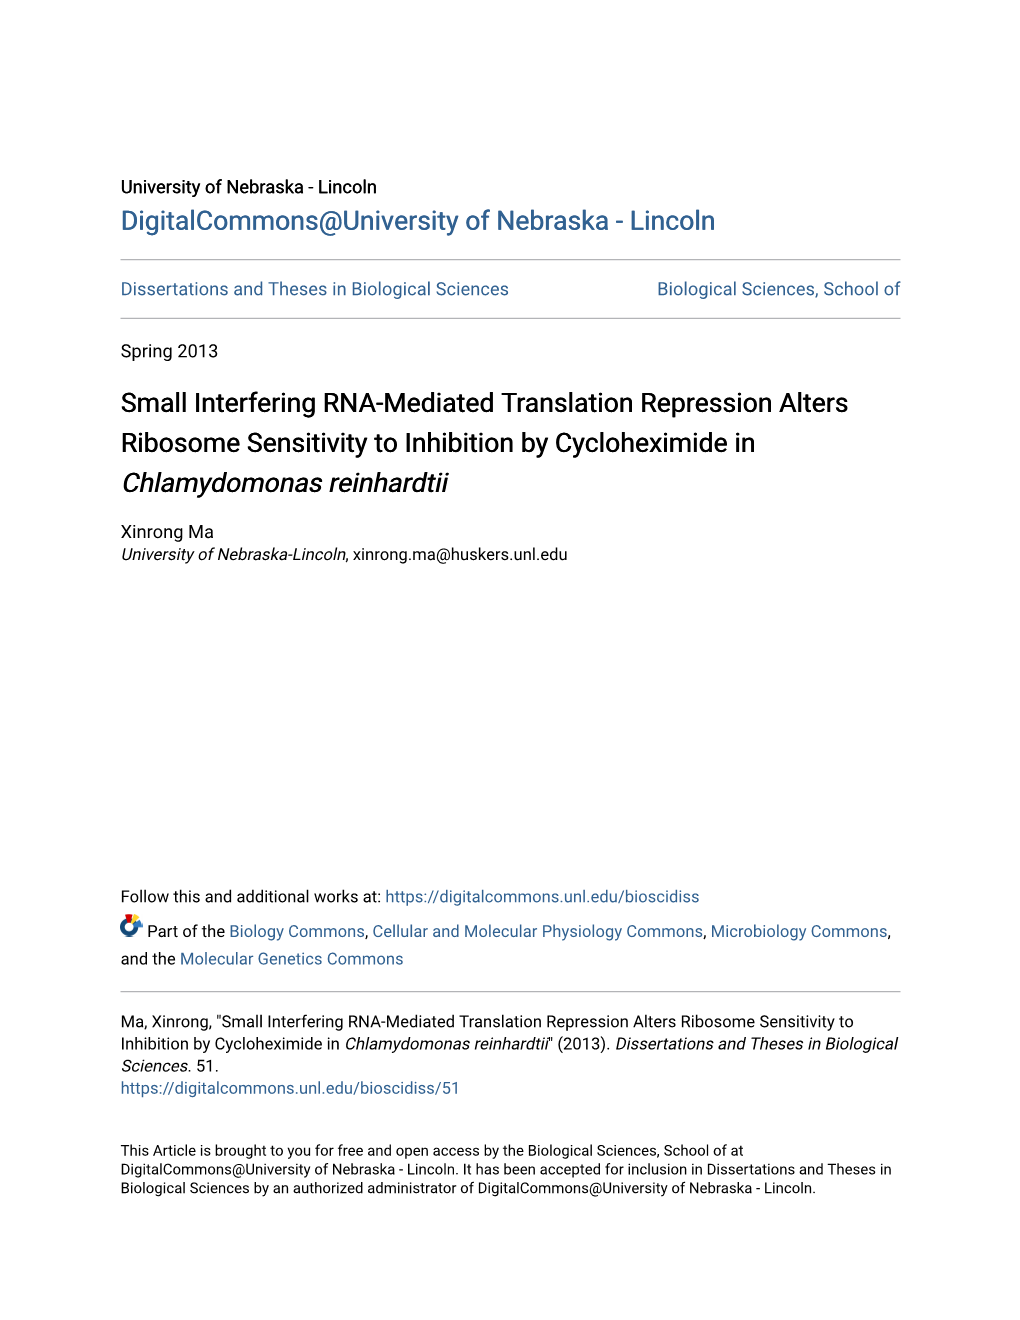 Small Interfering RNA-Mediated Translation Repression Alters Ribosome Sensitivity to Inhibition by Cycloheximide in Chlamydomonas Reinhardtii